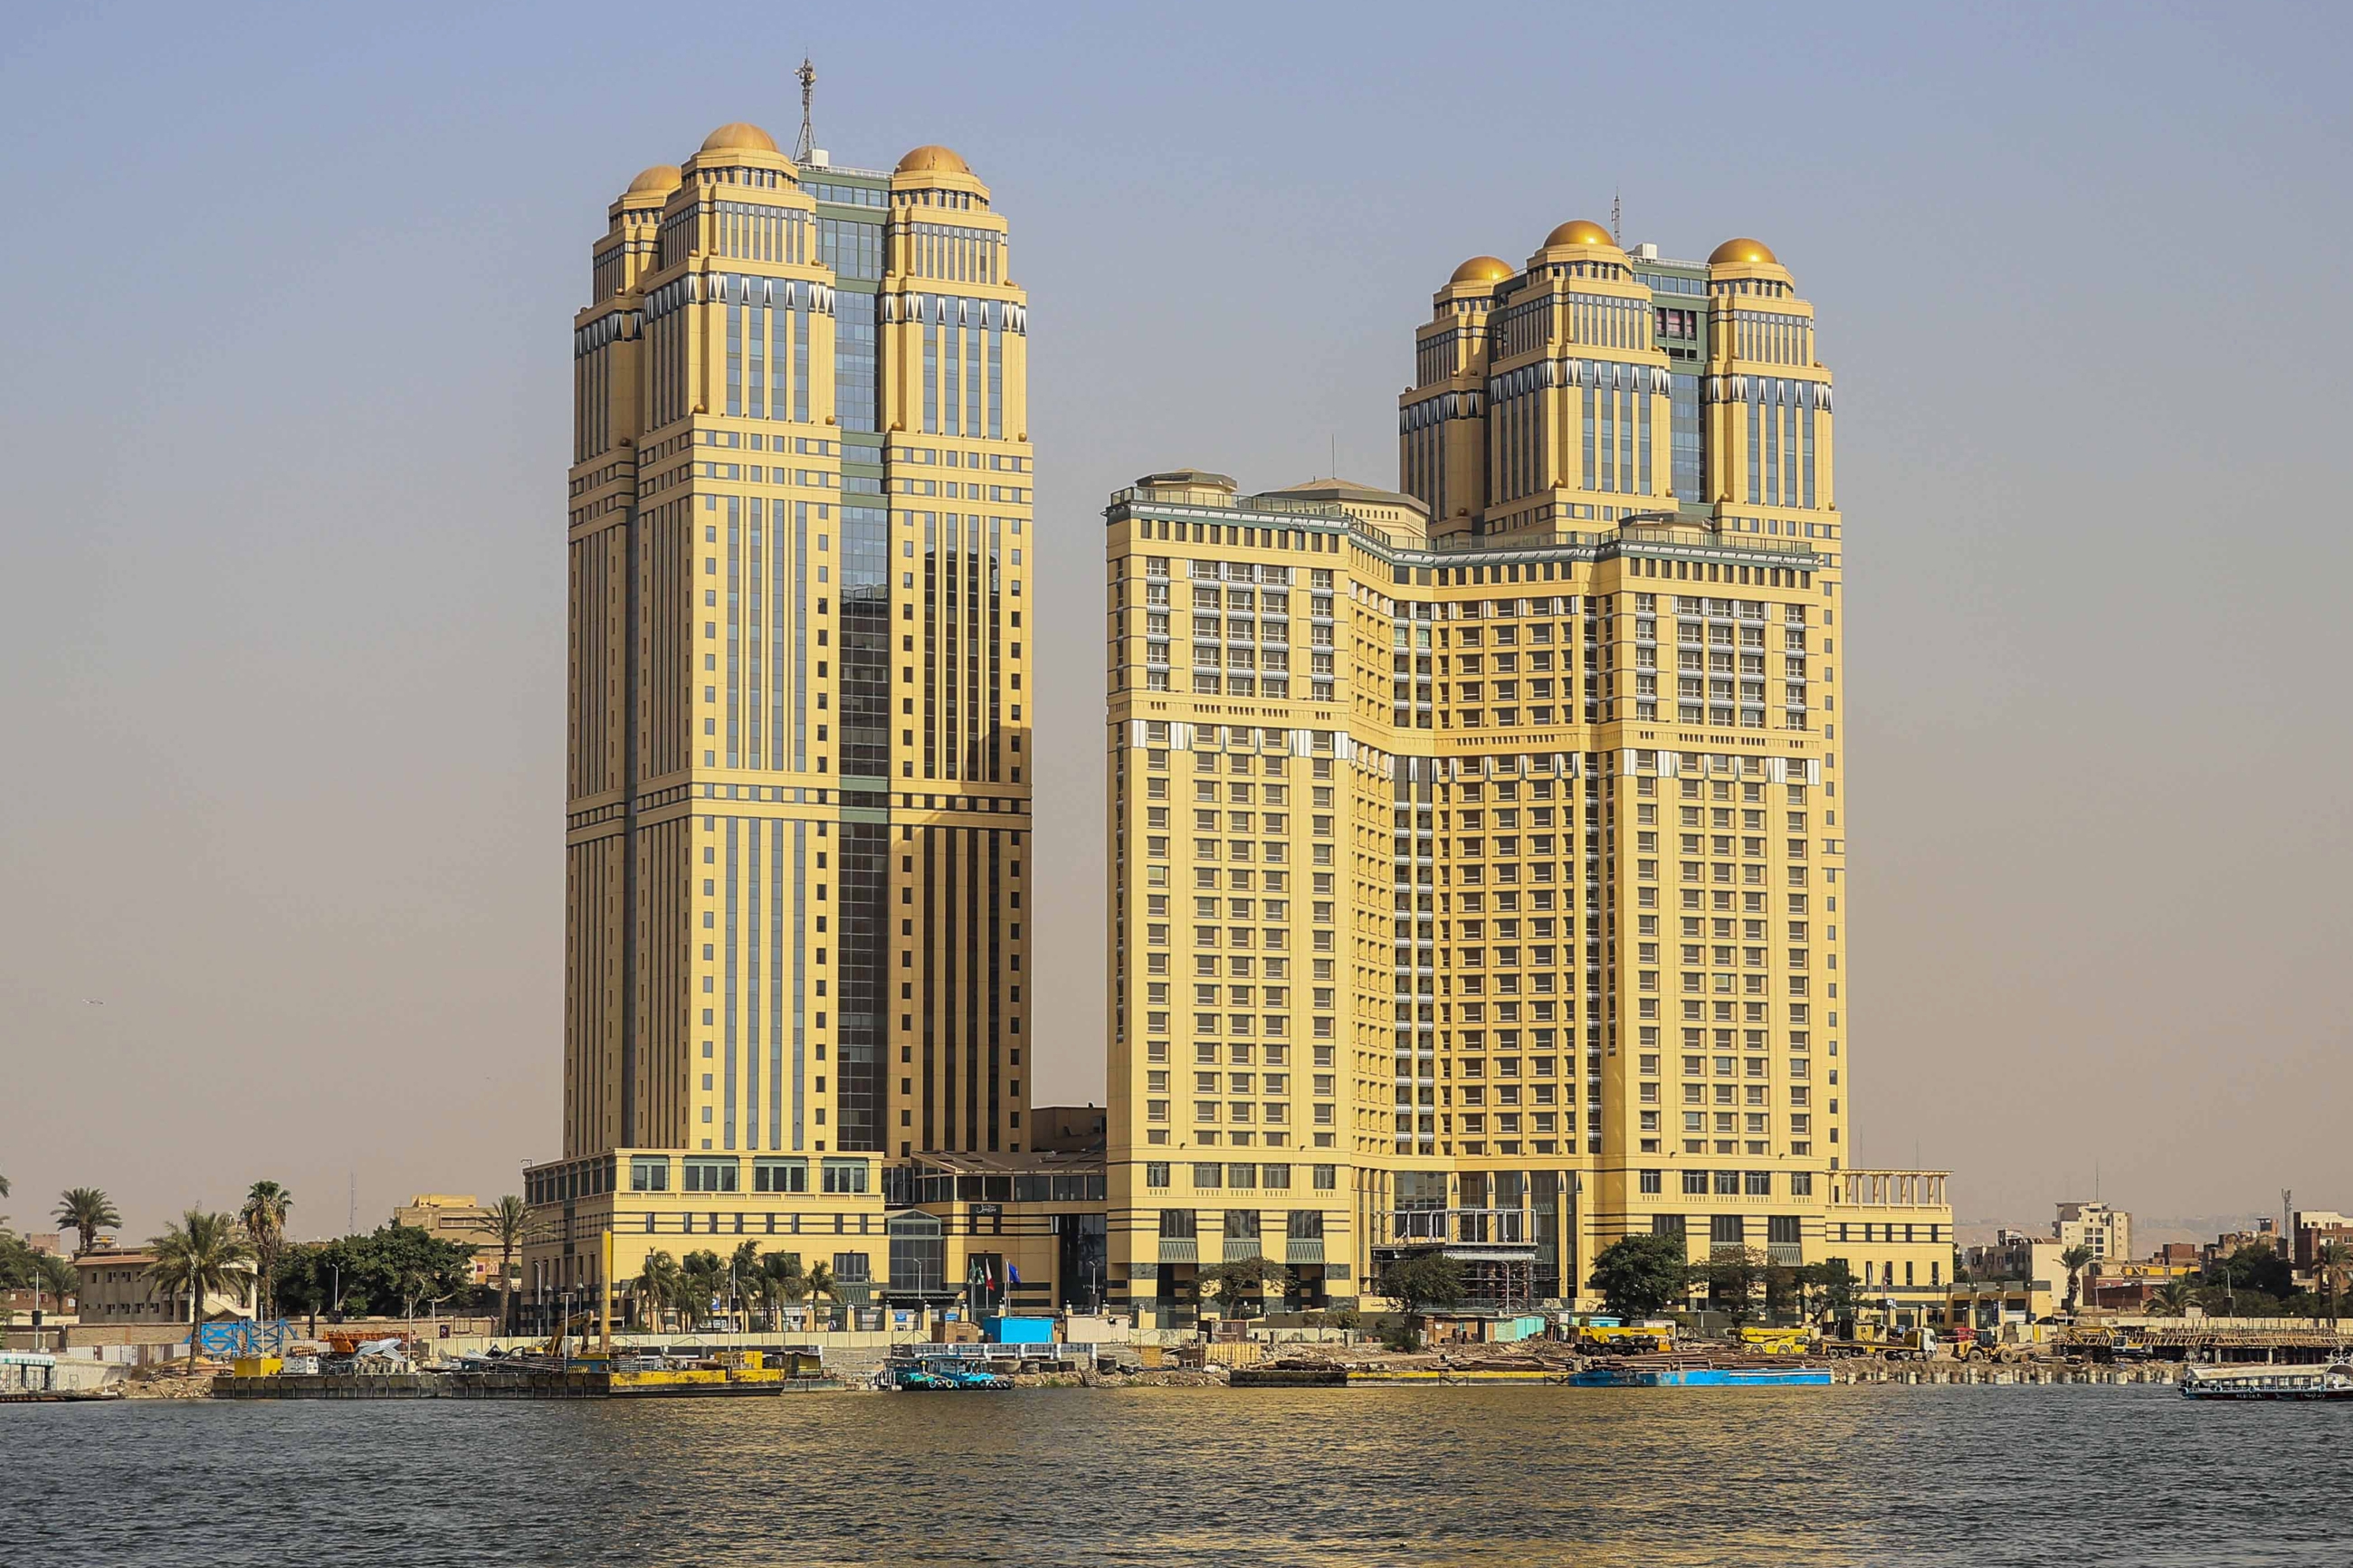 The attack took place at the Fairmont Nile City hotel in 2014 